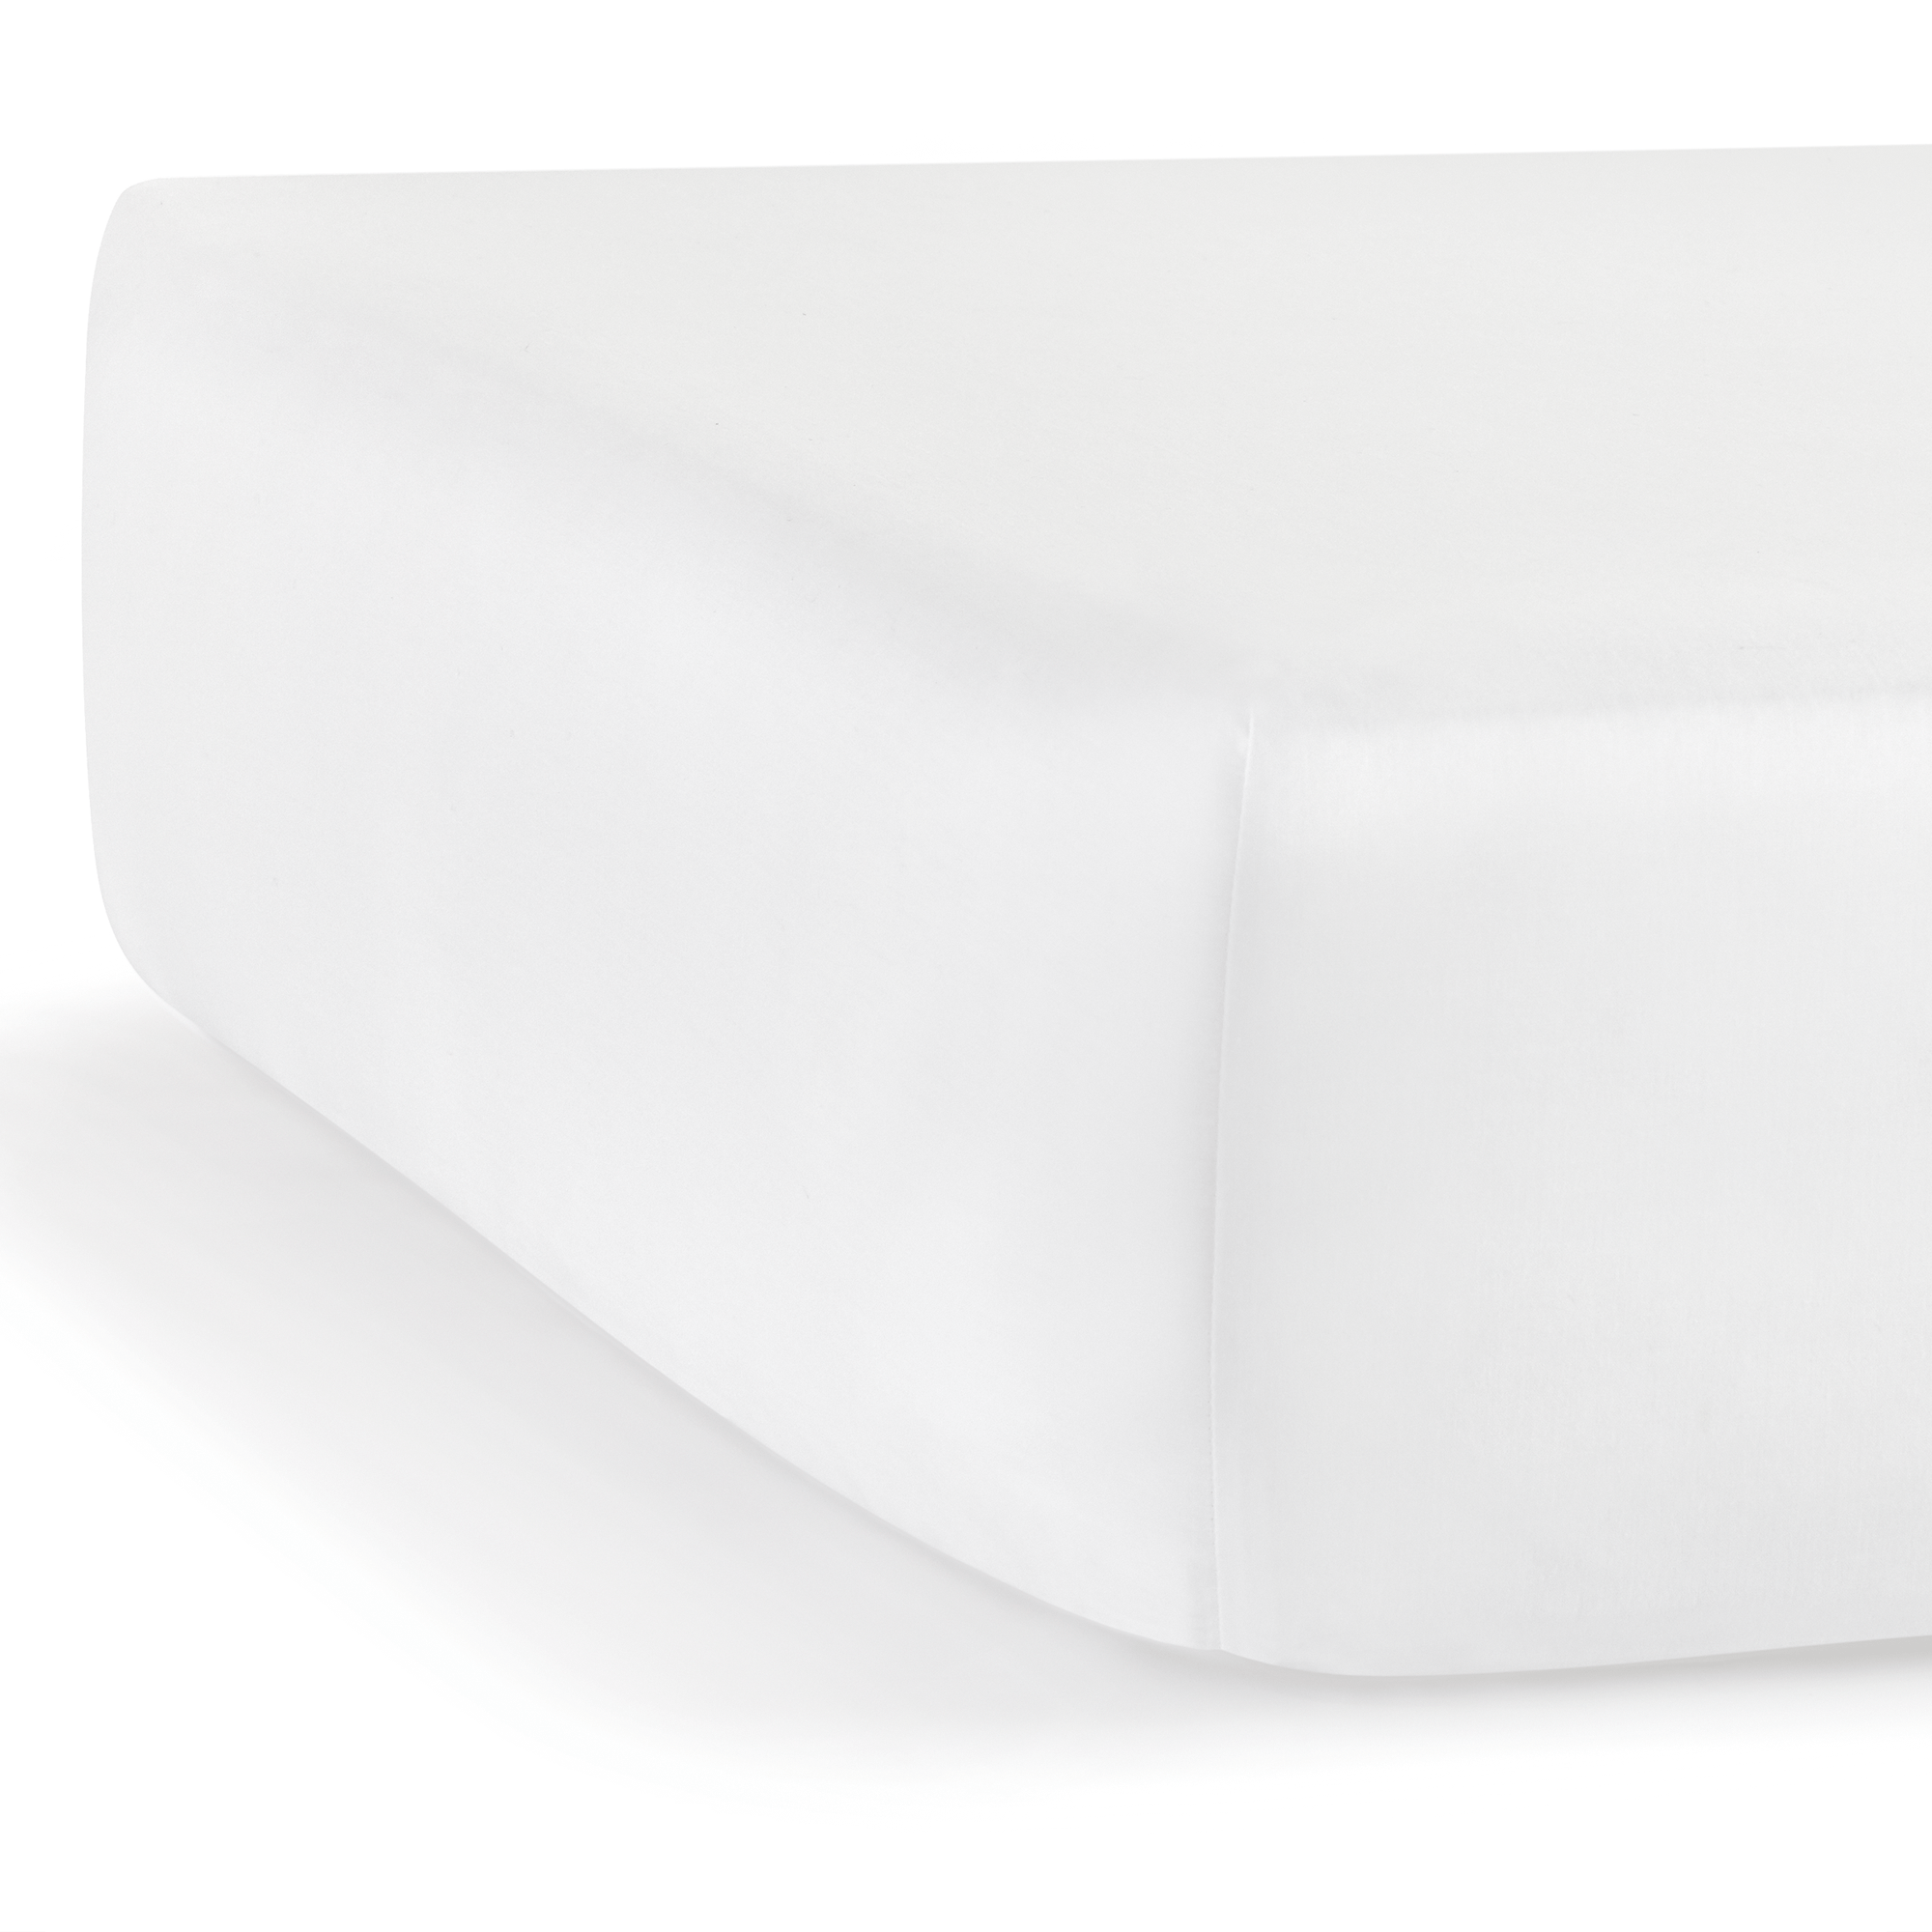 Fitted white Crib sheet tucked in the corner